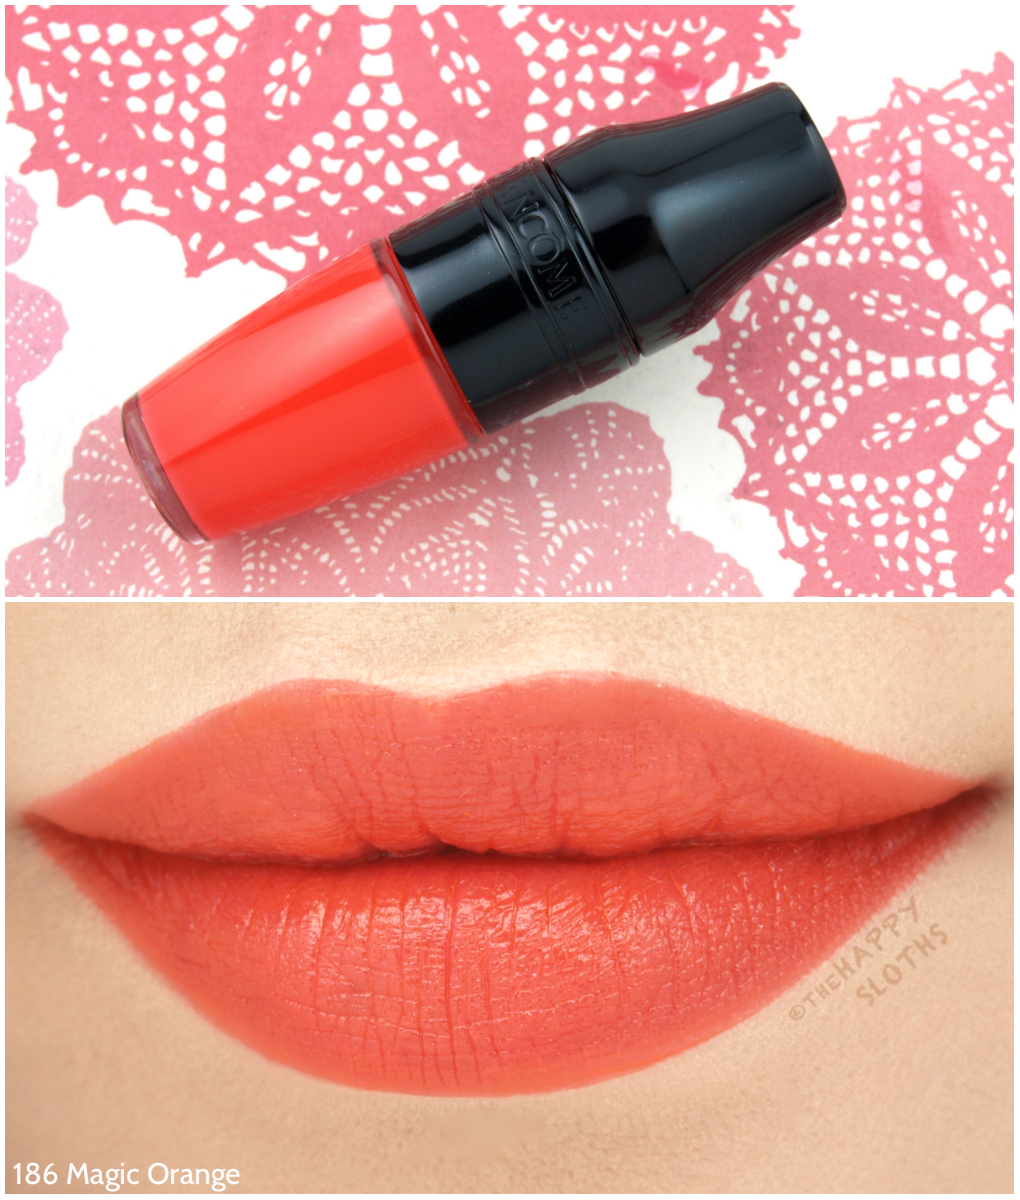 Lancome Matte Shaker in "186 Magic Orange": Review and Swatches